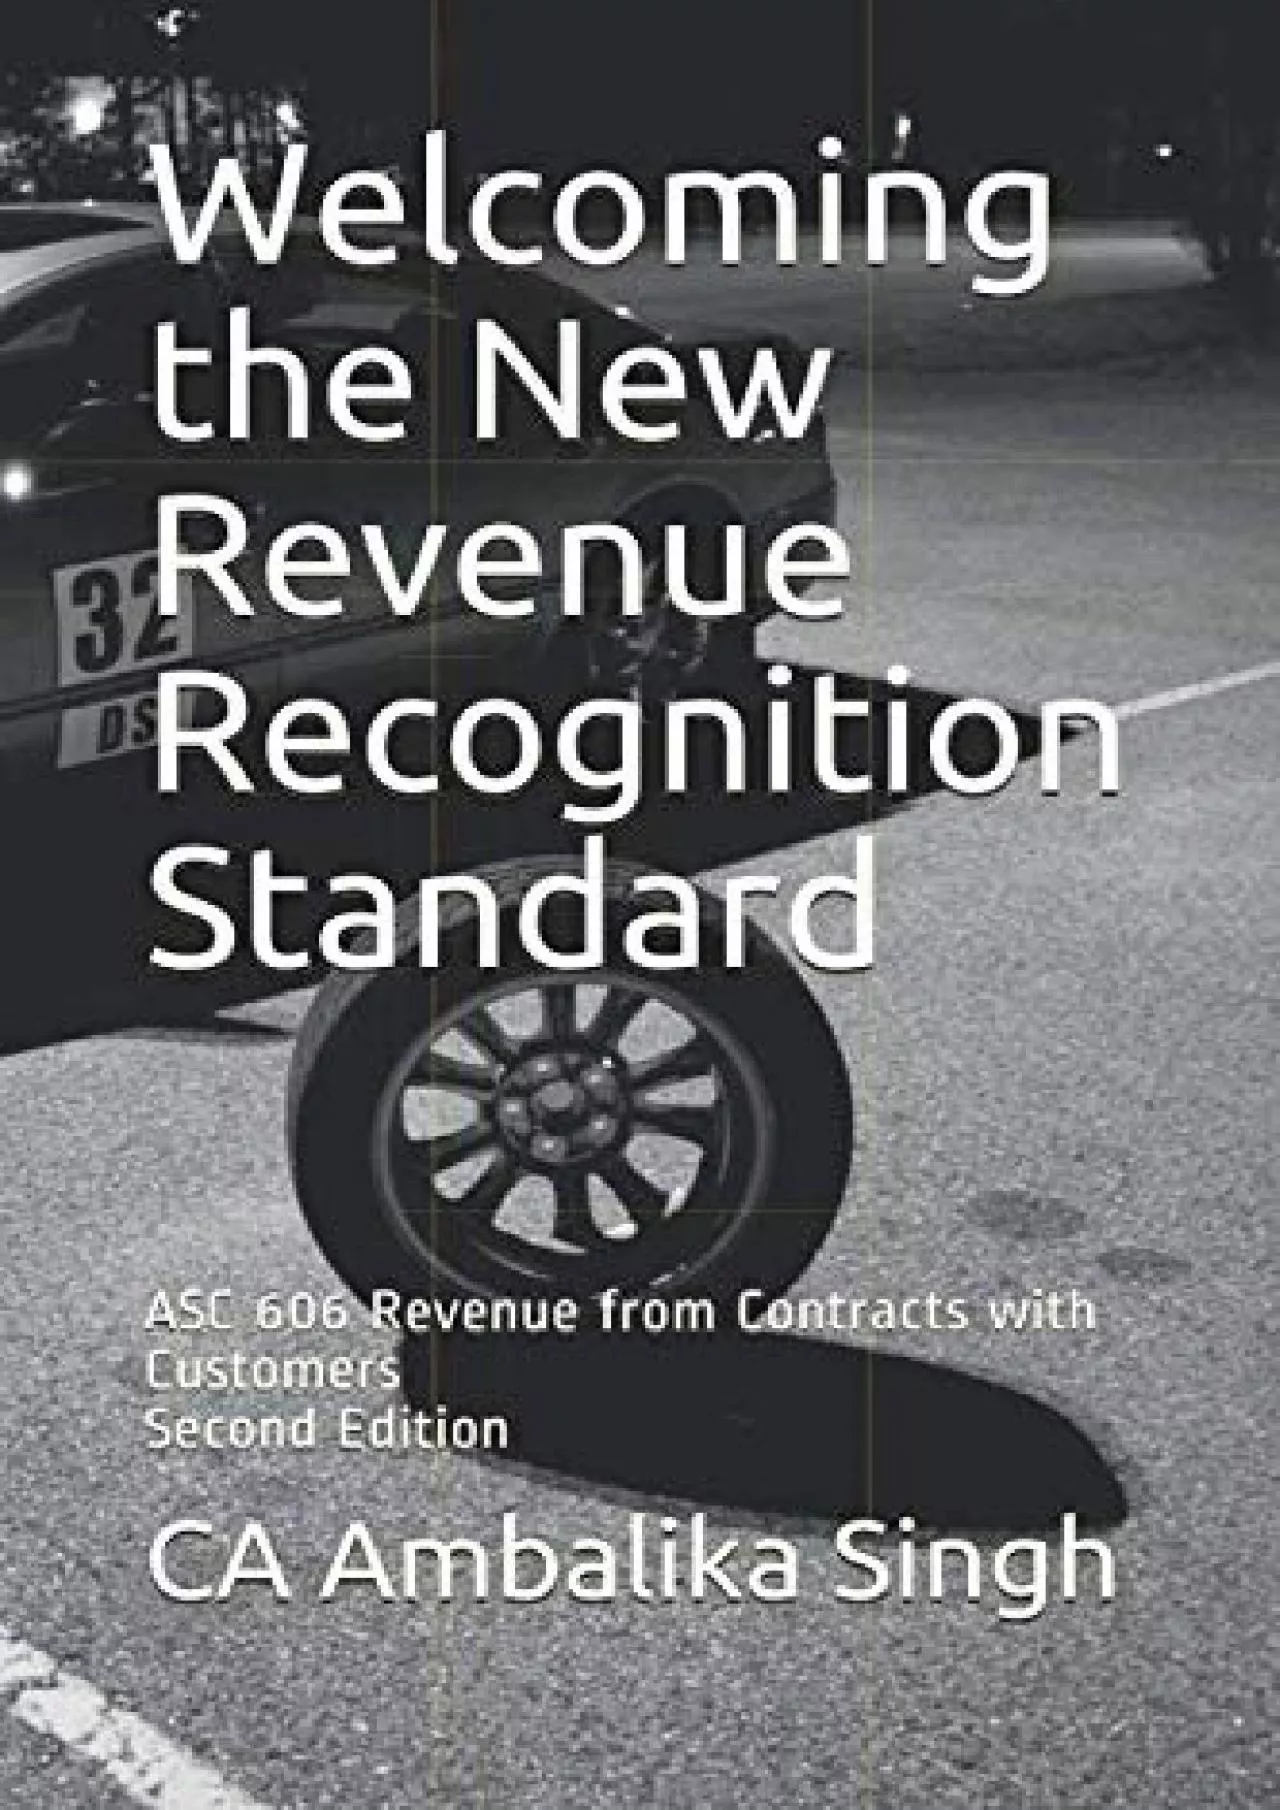 (DOWNLOAD)-Welcoming the New Revenue Recognition Standard: ASC 606 Revenue from Contracts